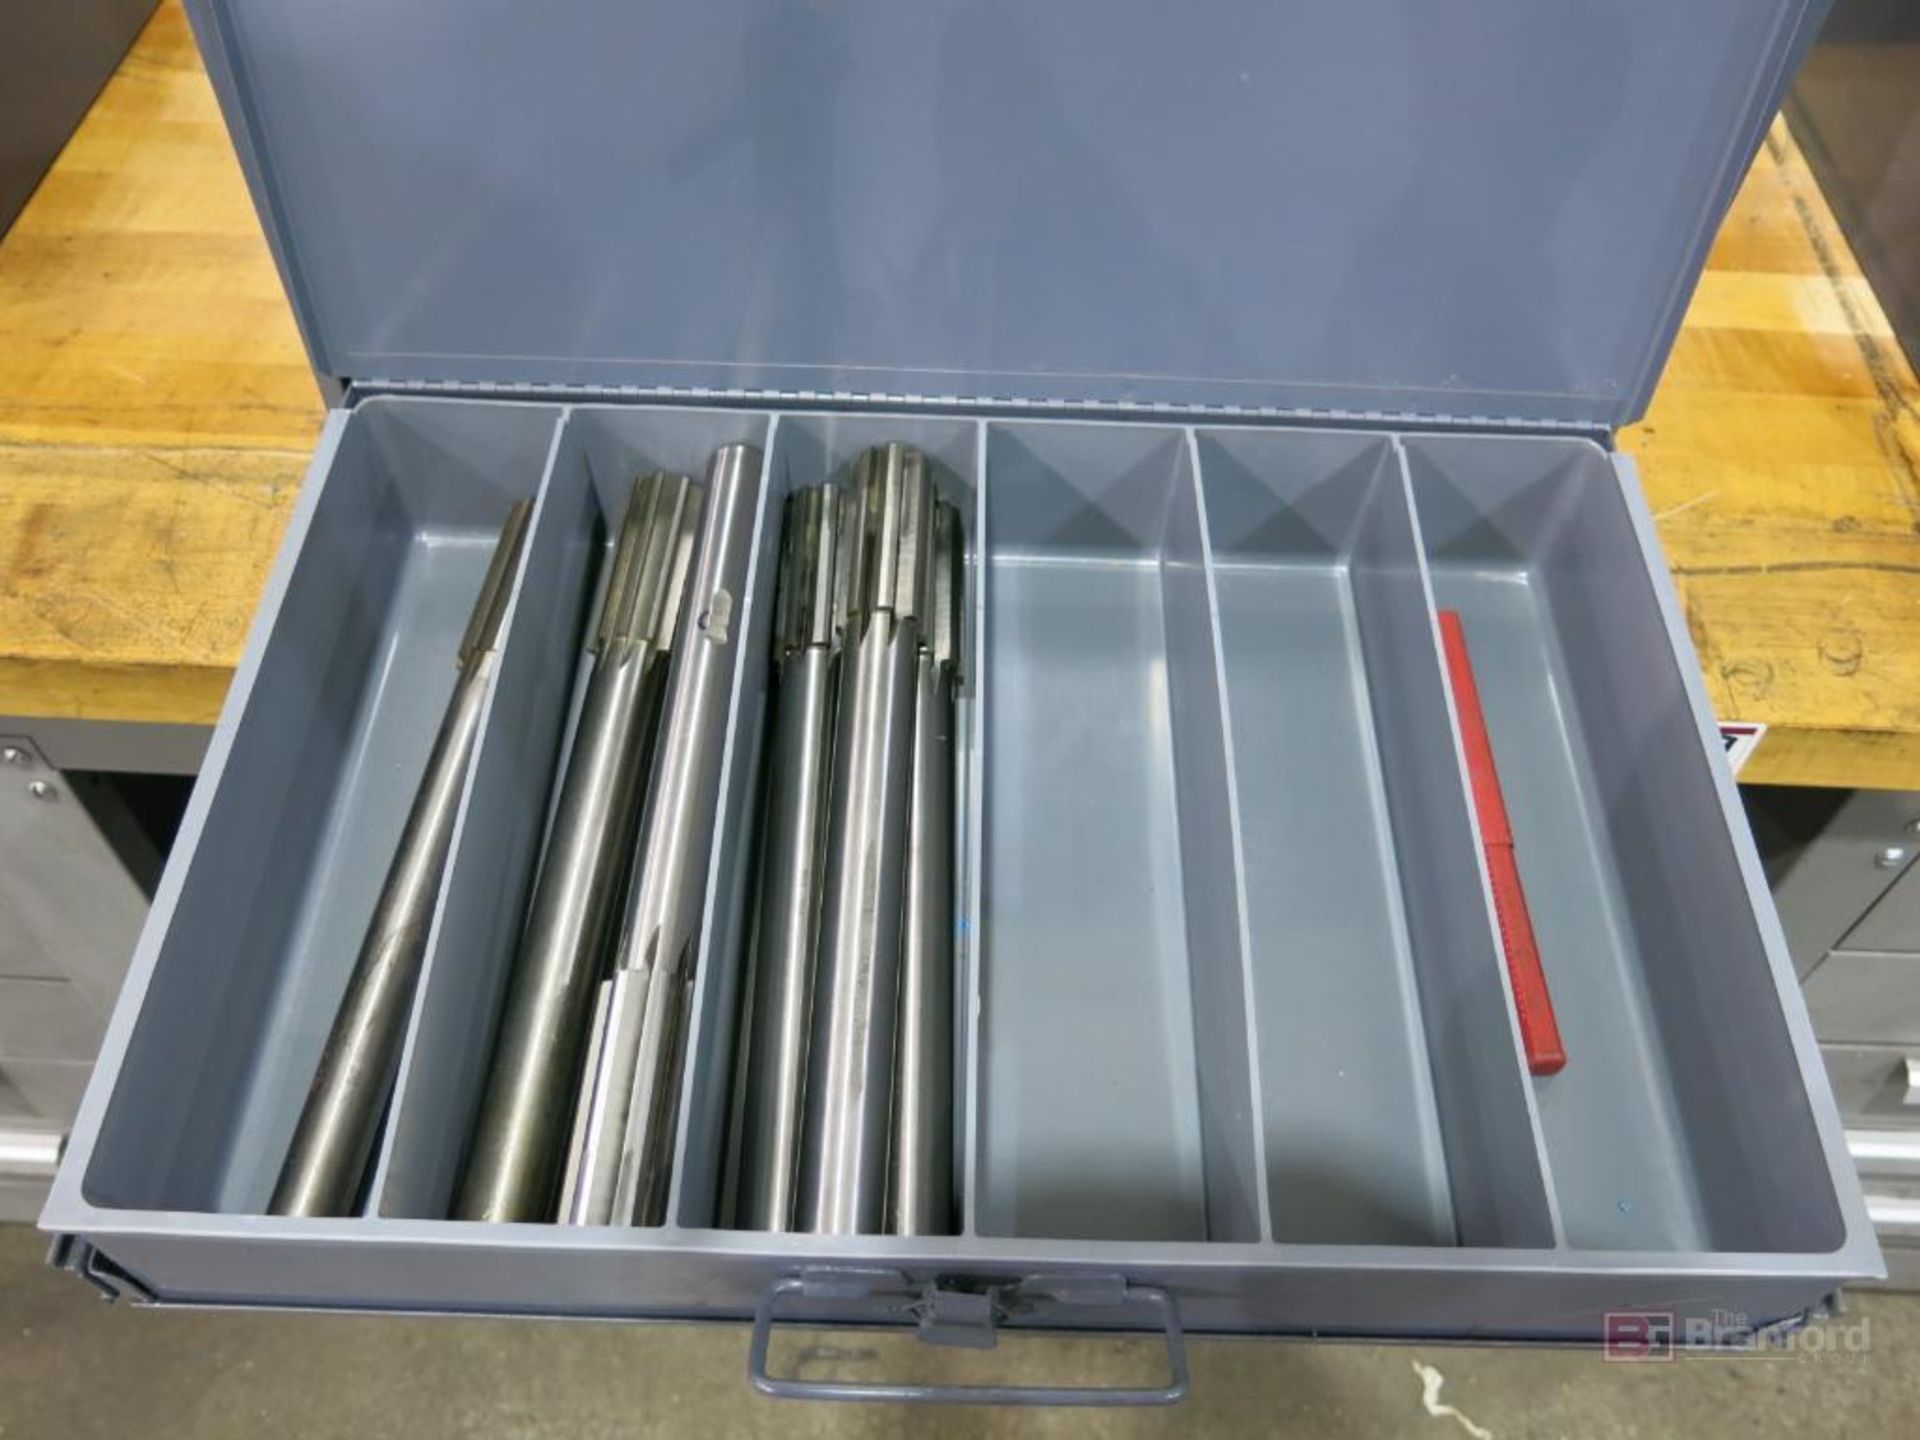 Durham Manufacturing 4-Drawer Small Parts Bins w/ Contents - Image 5 of 5